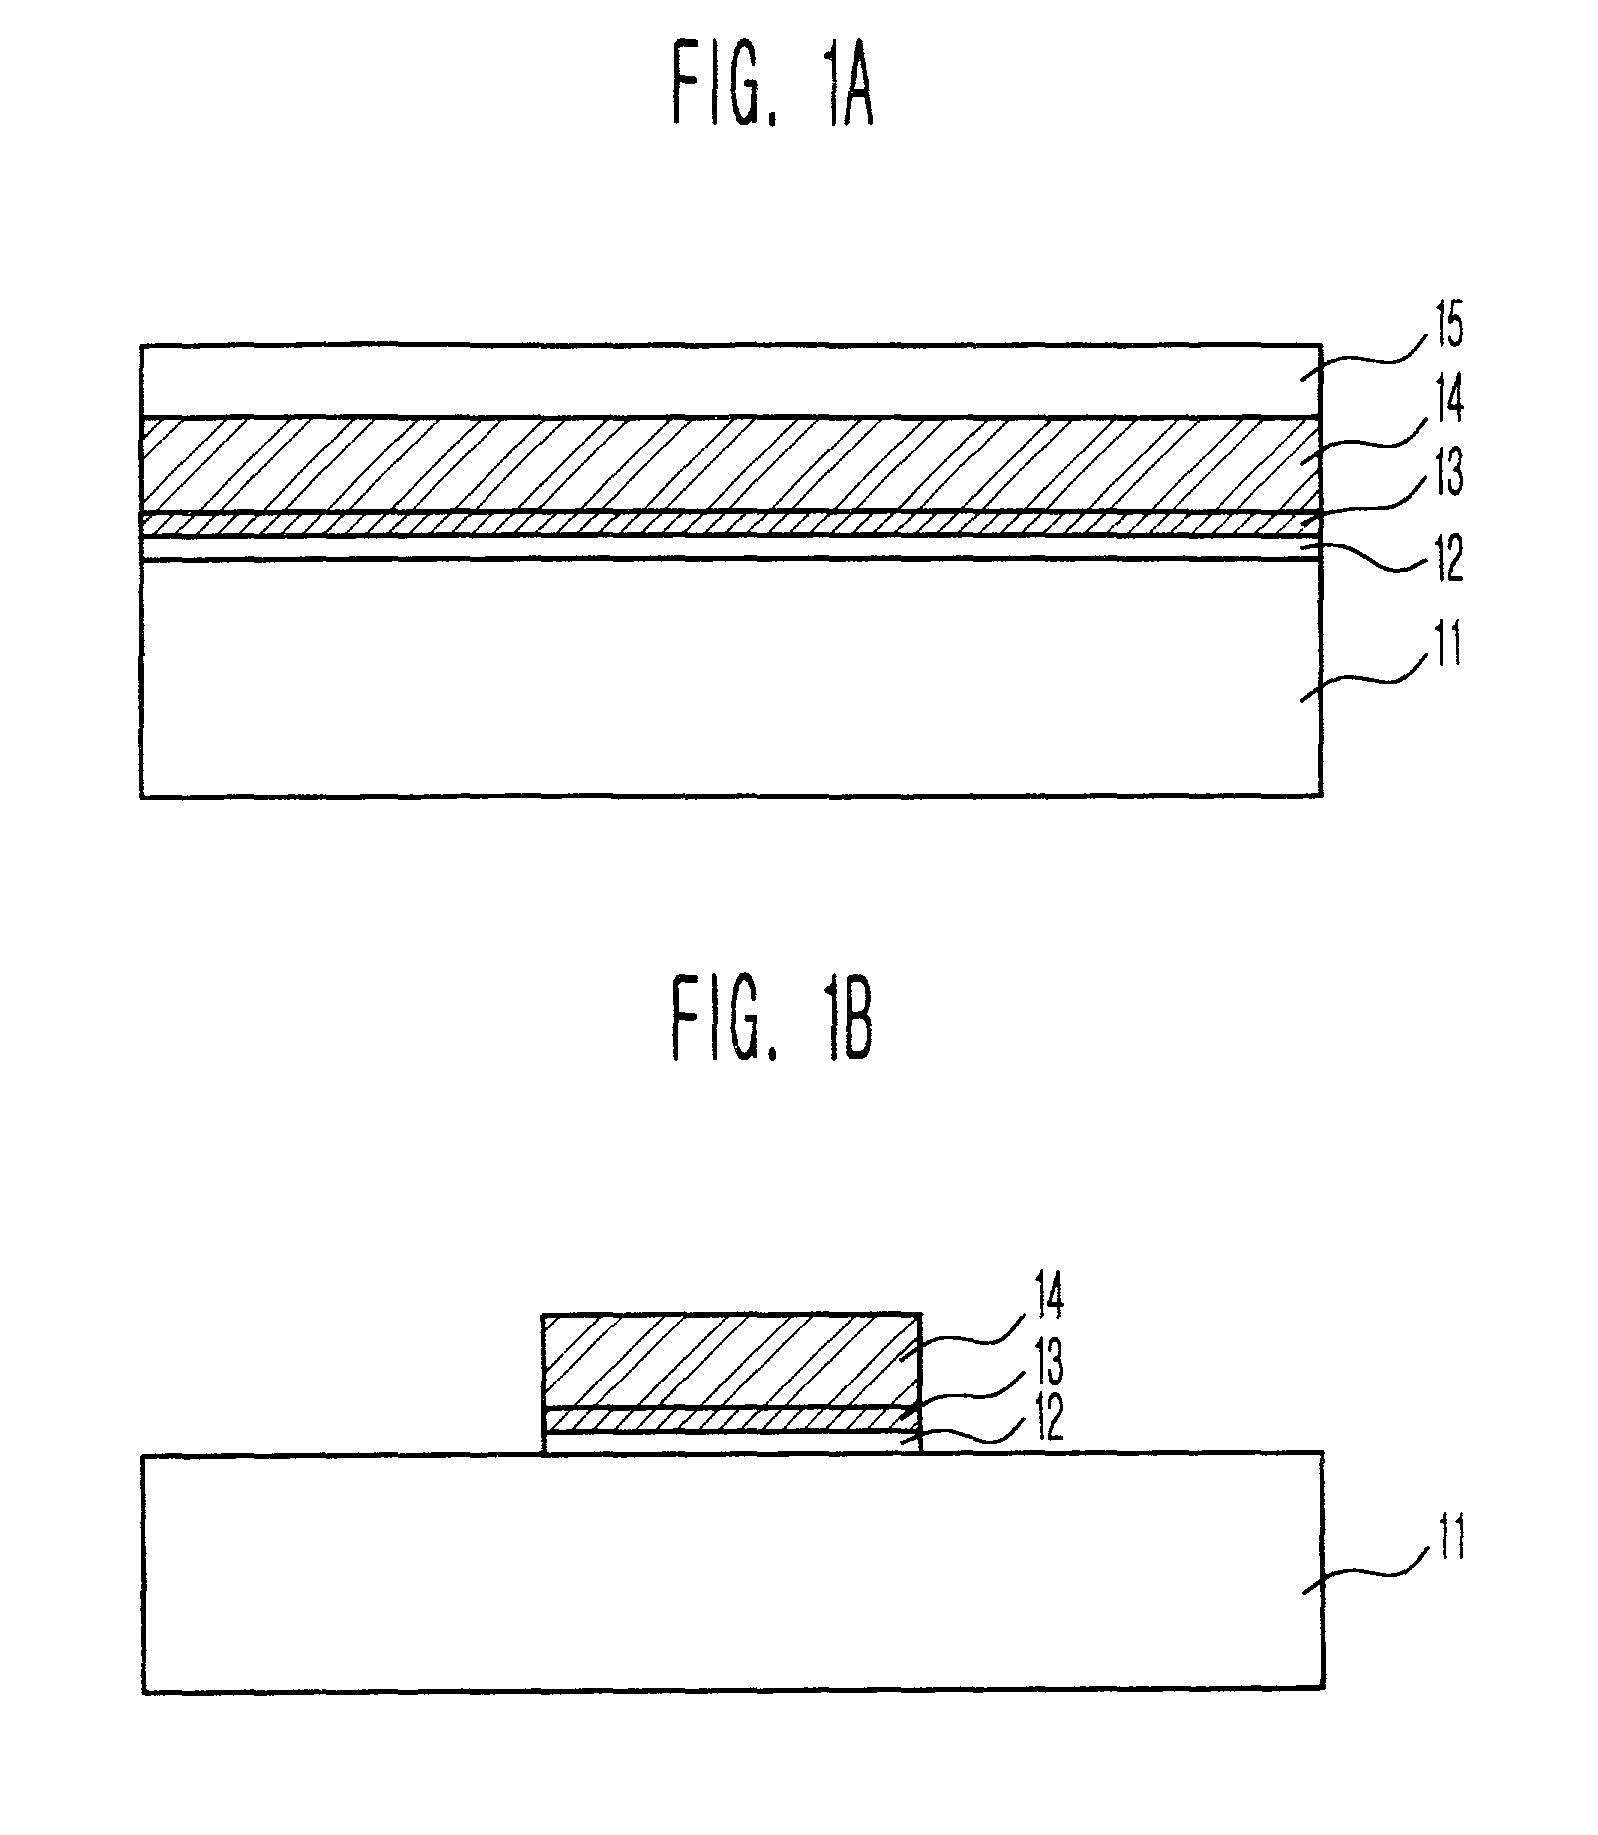 Method of manufacturing a gate in a semiconductor device